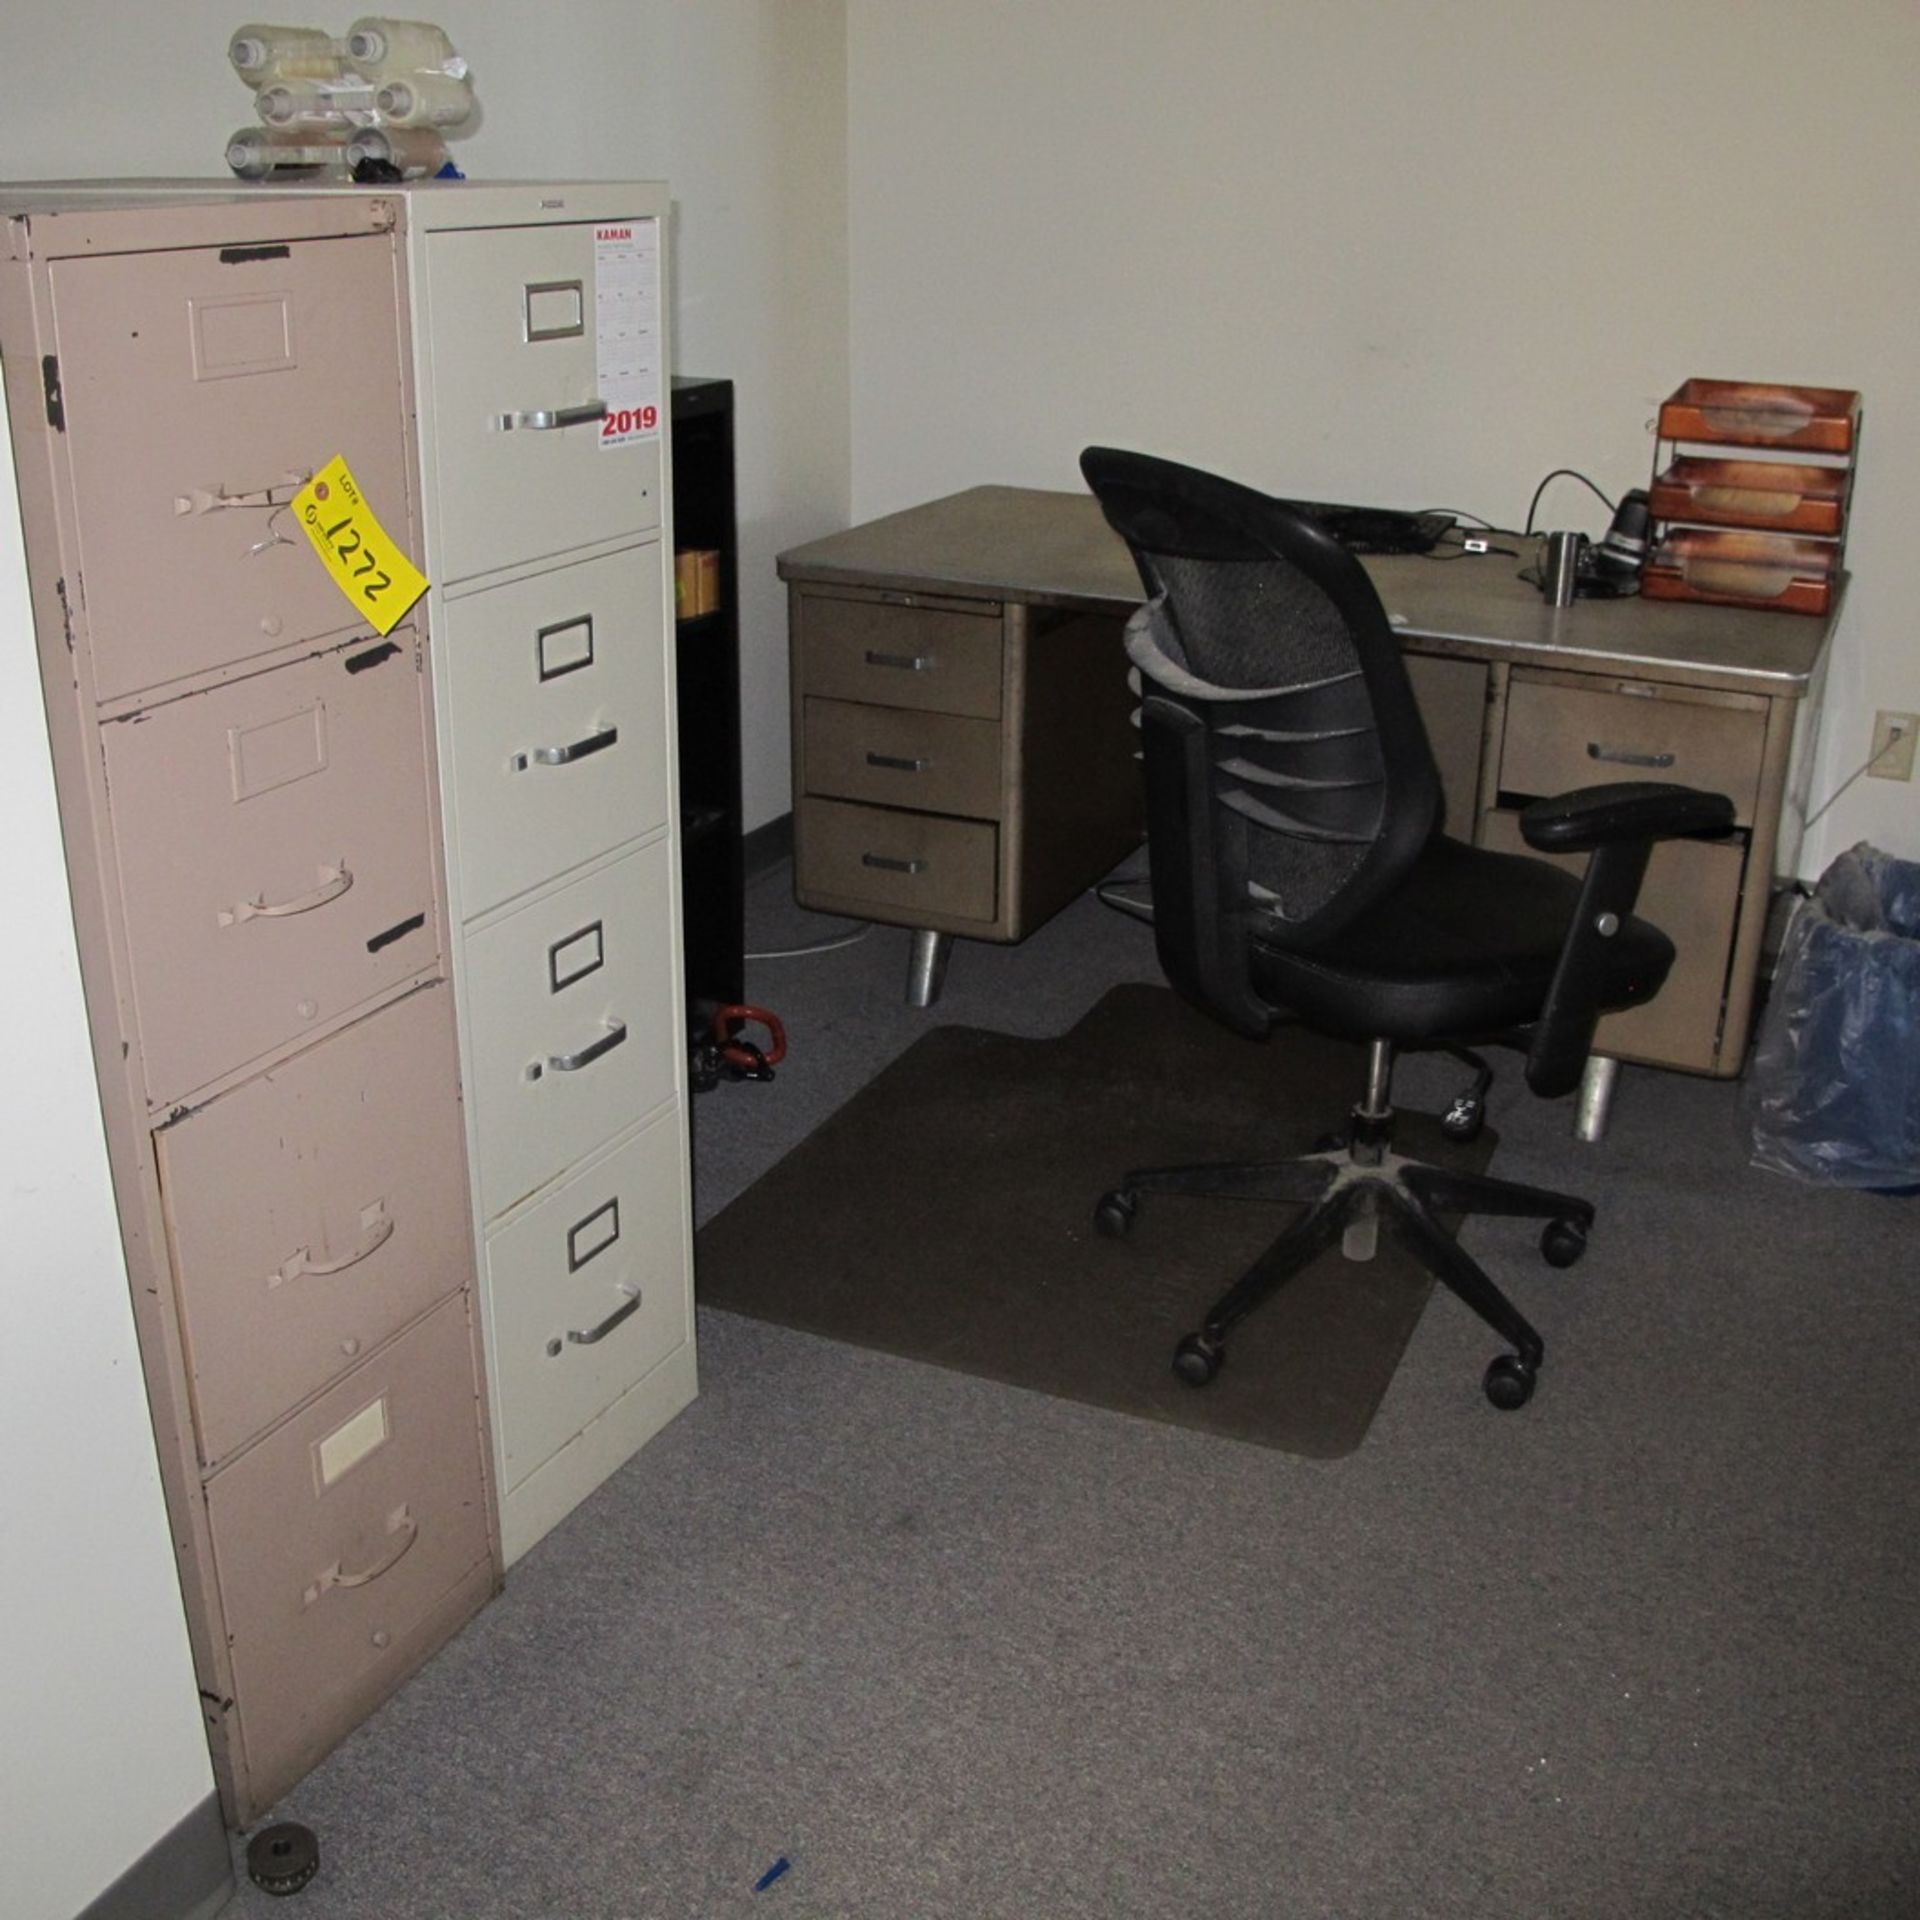 DESK, CHAIR, (2) FILE CABINETS, BAR FRIDGE (NO CONTENTS - FURNITURE ONLY) (UPPER OFFICES)